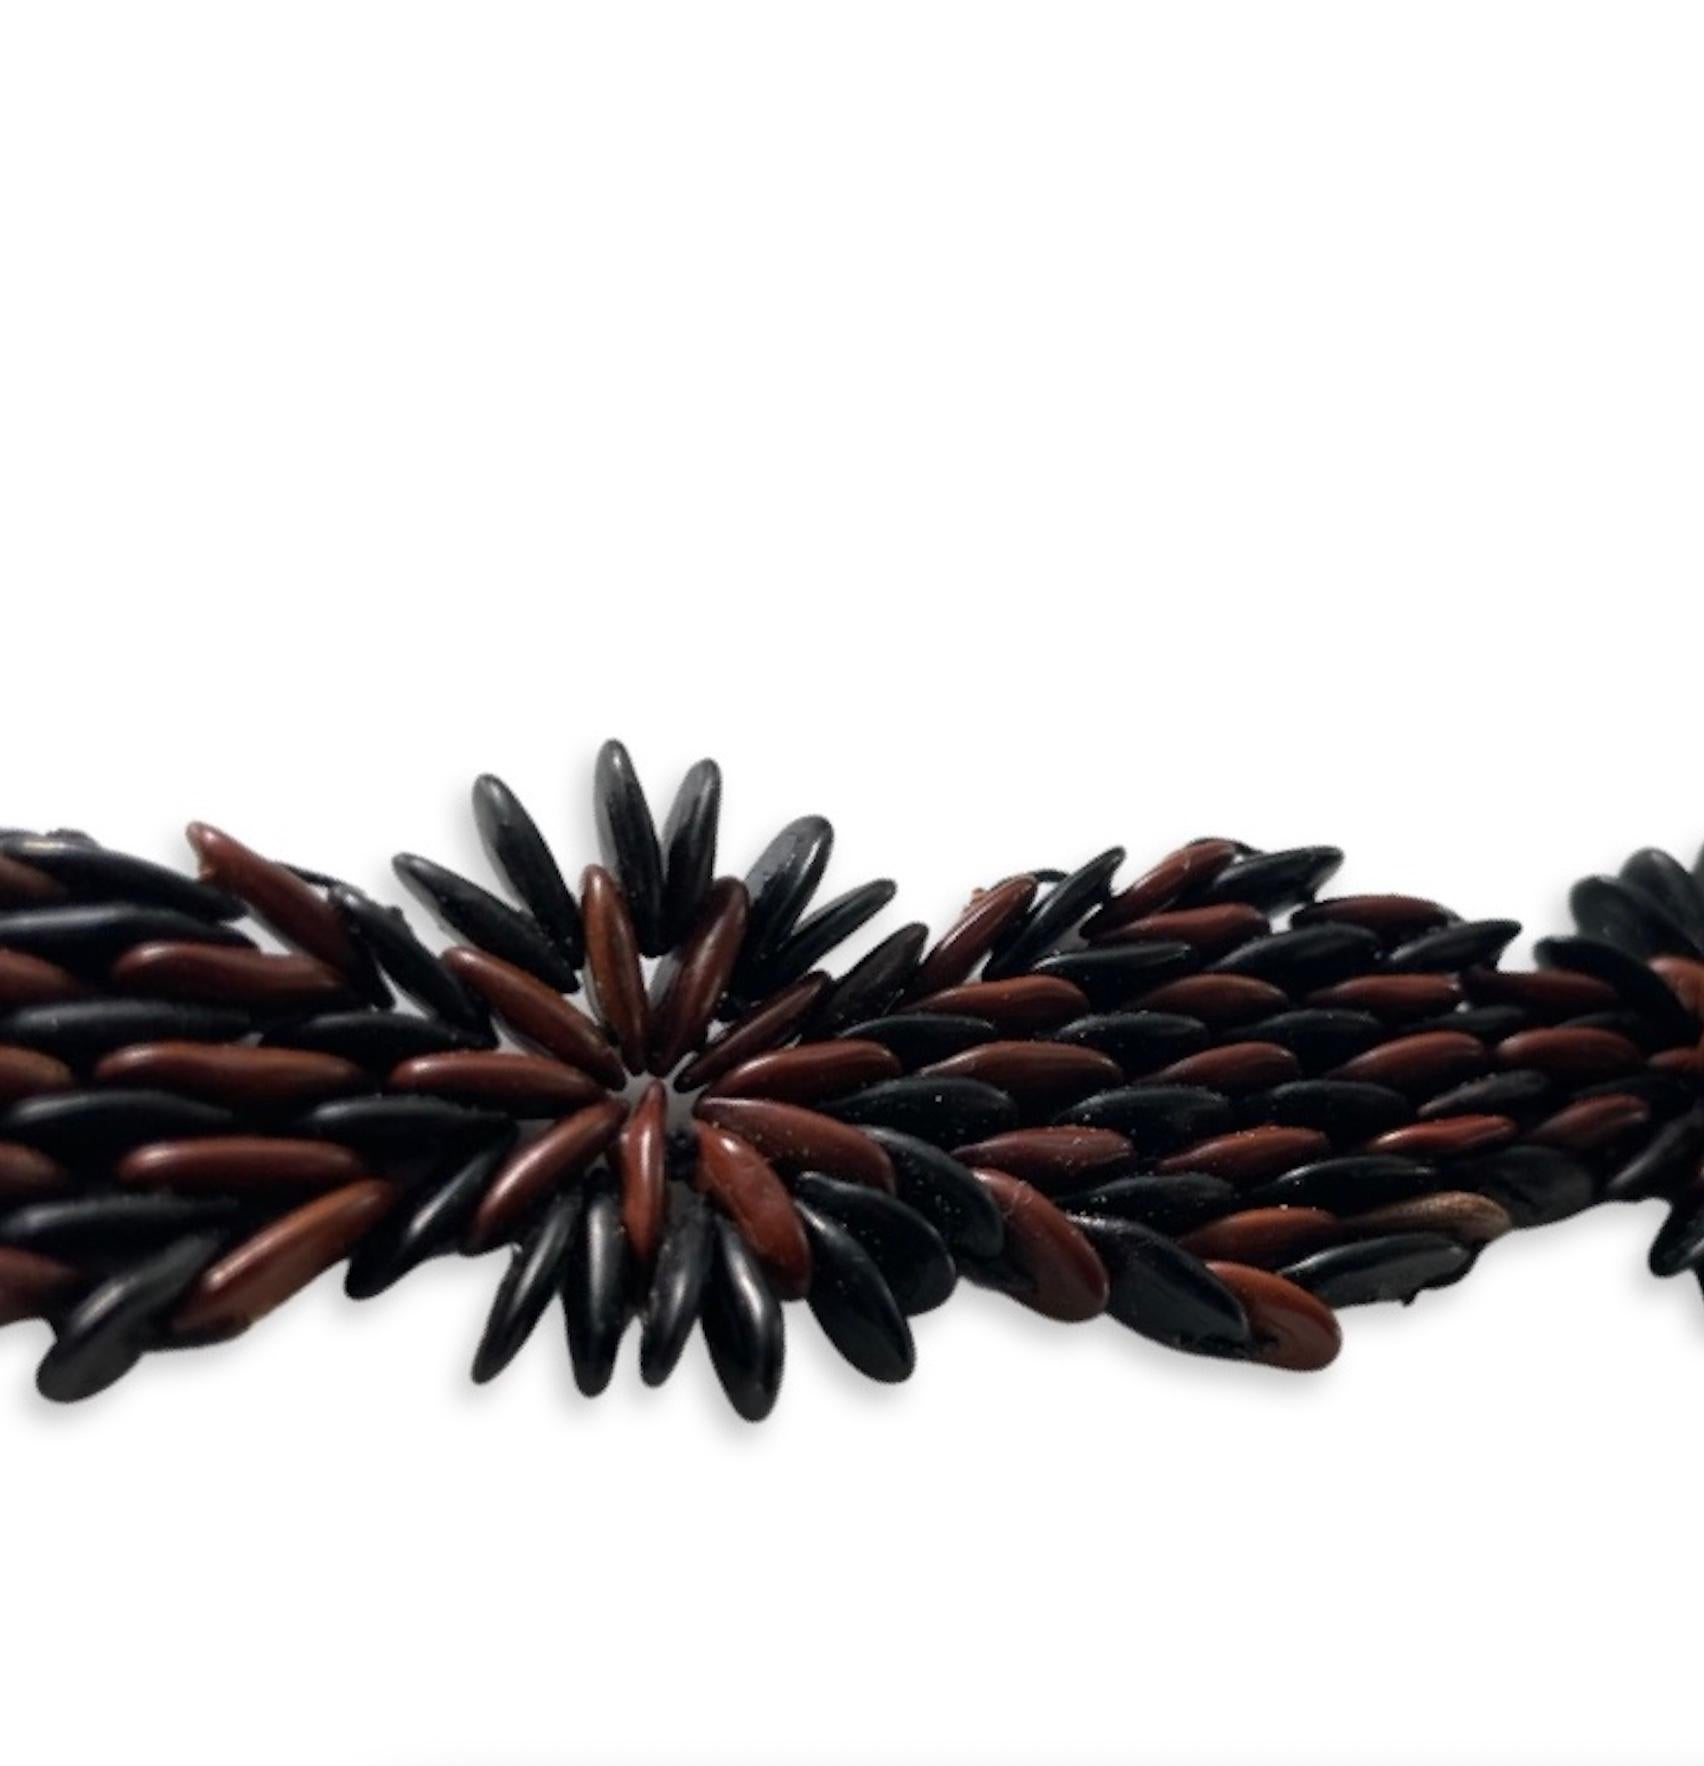 The designs express the perfect synergy between Black and Brown wild tamarind seeds when combined in a dazzling palette. Aptly named an ode to Antigua’s vibrant culture around sailing, the “Argo” Bracelet pays tribute to a ship that sails under the